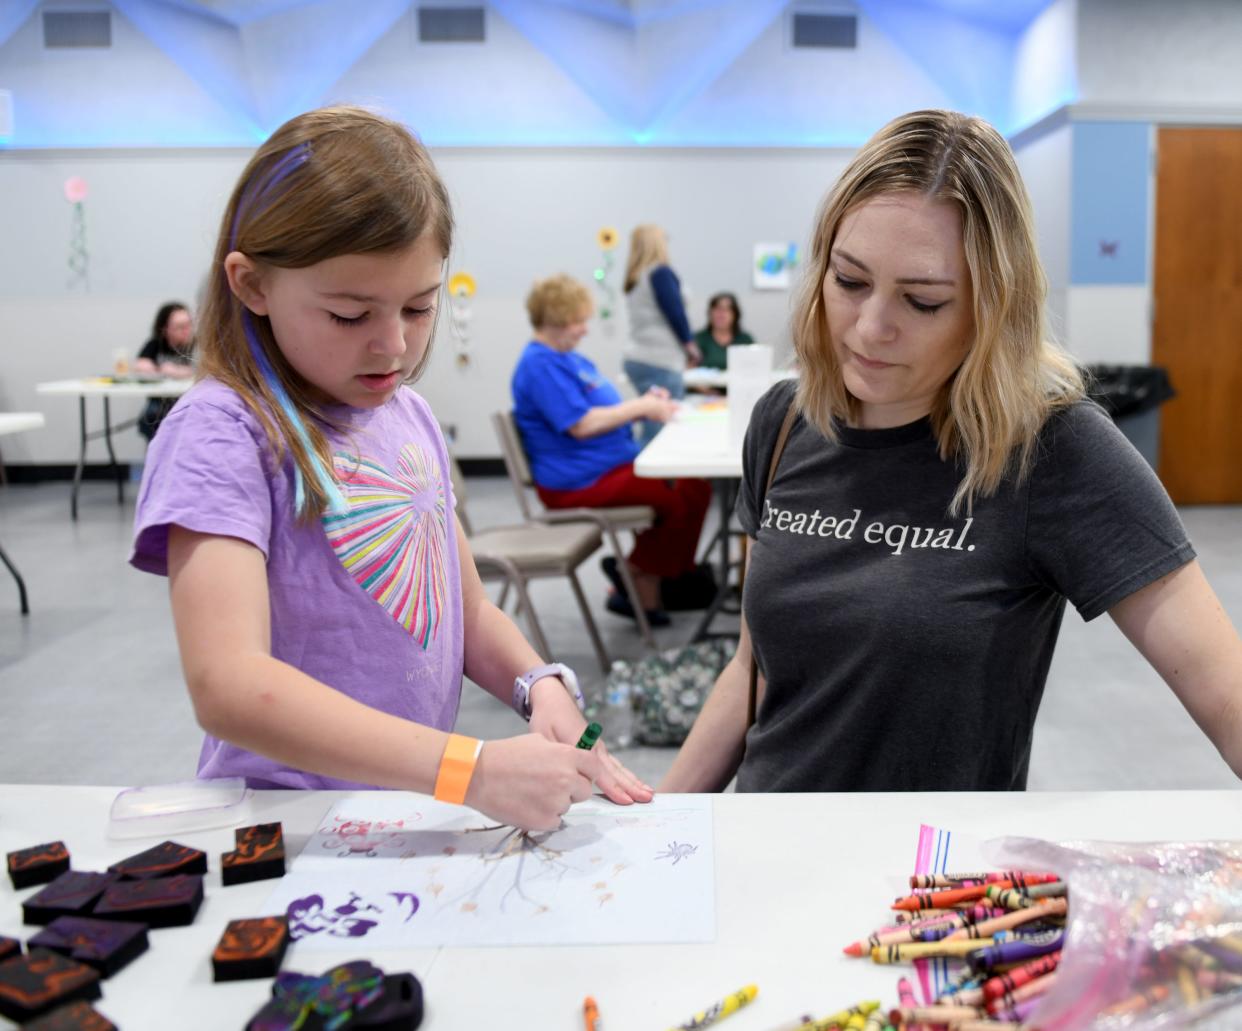 Eva Kocher, 8, and mother Jenna Kocher of Plain Township work on a nature art project during the recent Wm. McKinley Presidential Library & Museum Science Earth Day celebration.